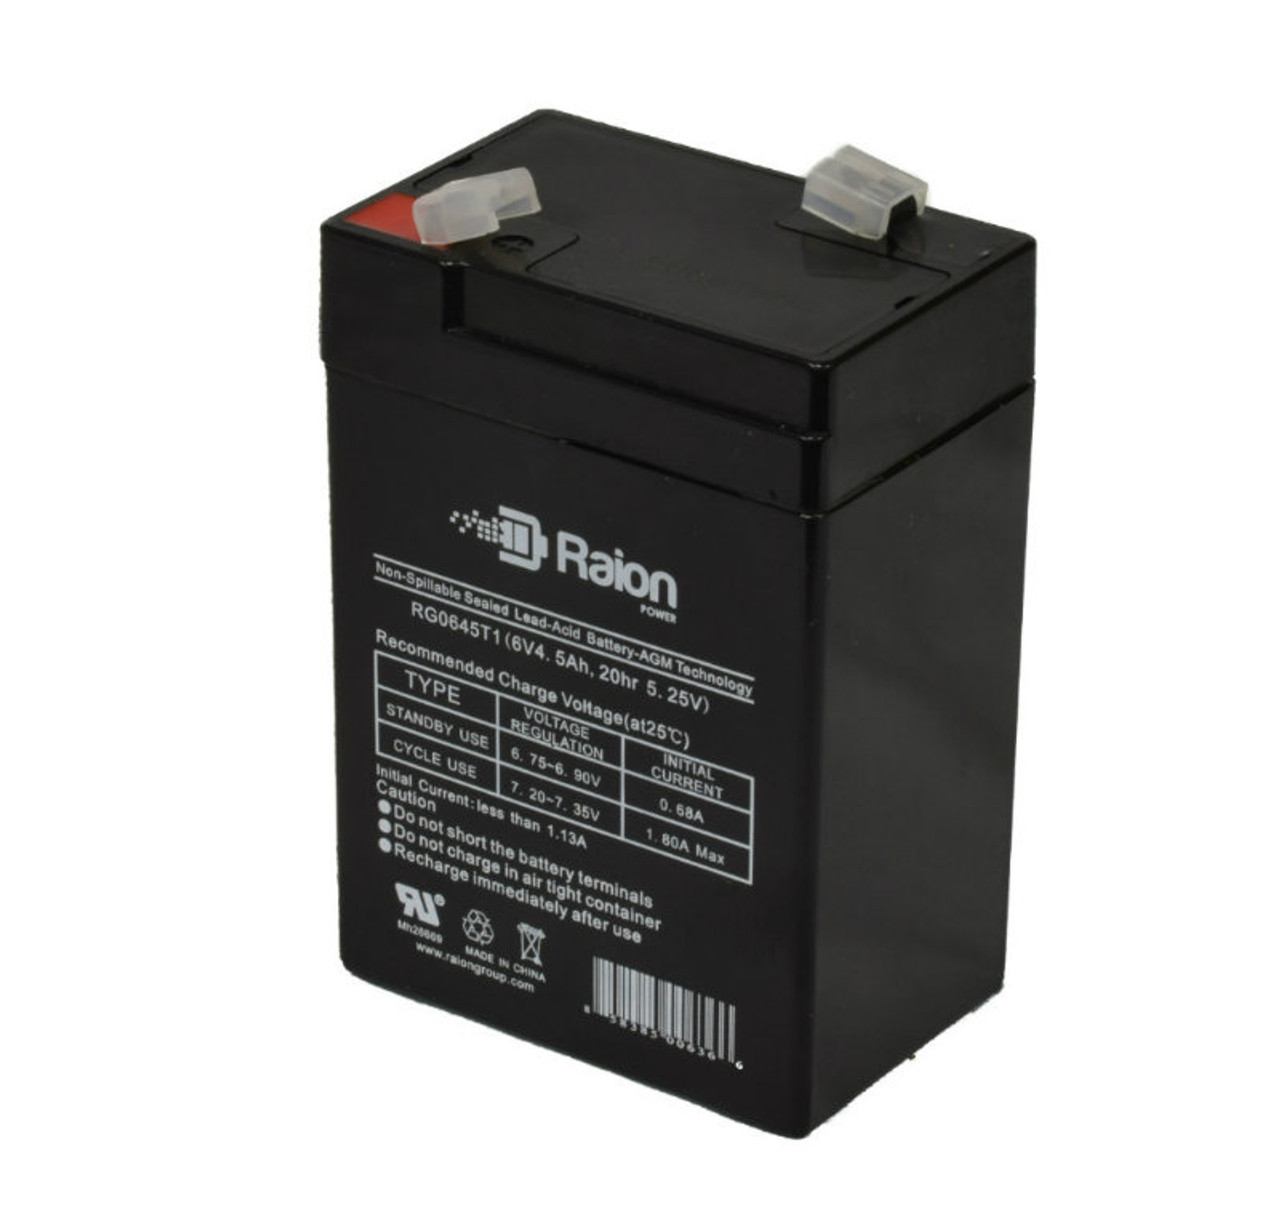 Raion Power RG0645T1 6V 4.5Ah Replacement Battery Cartridge for Unibo GB6-4